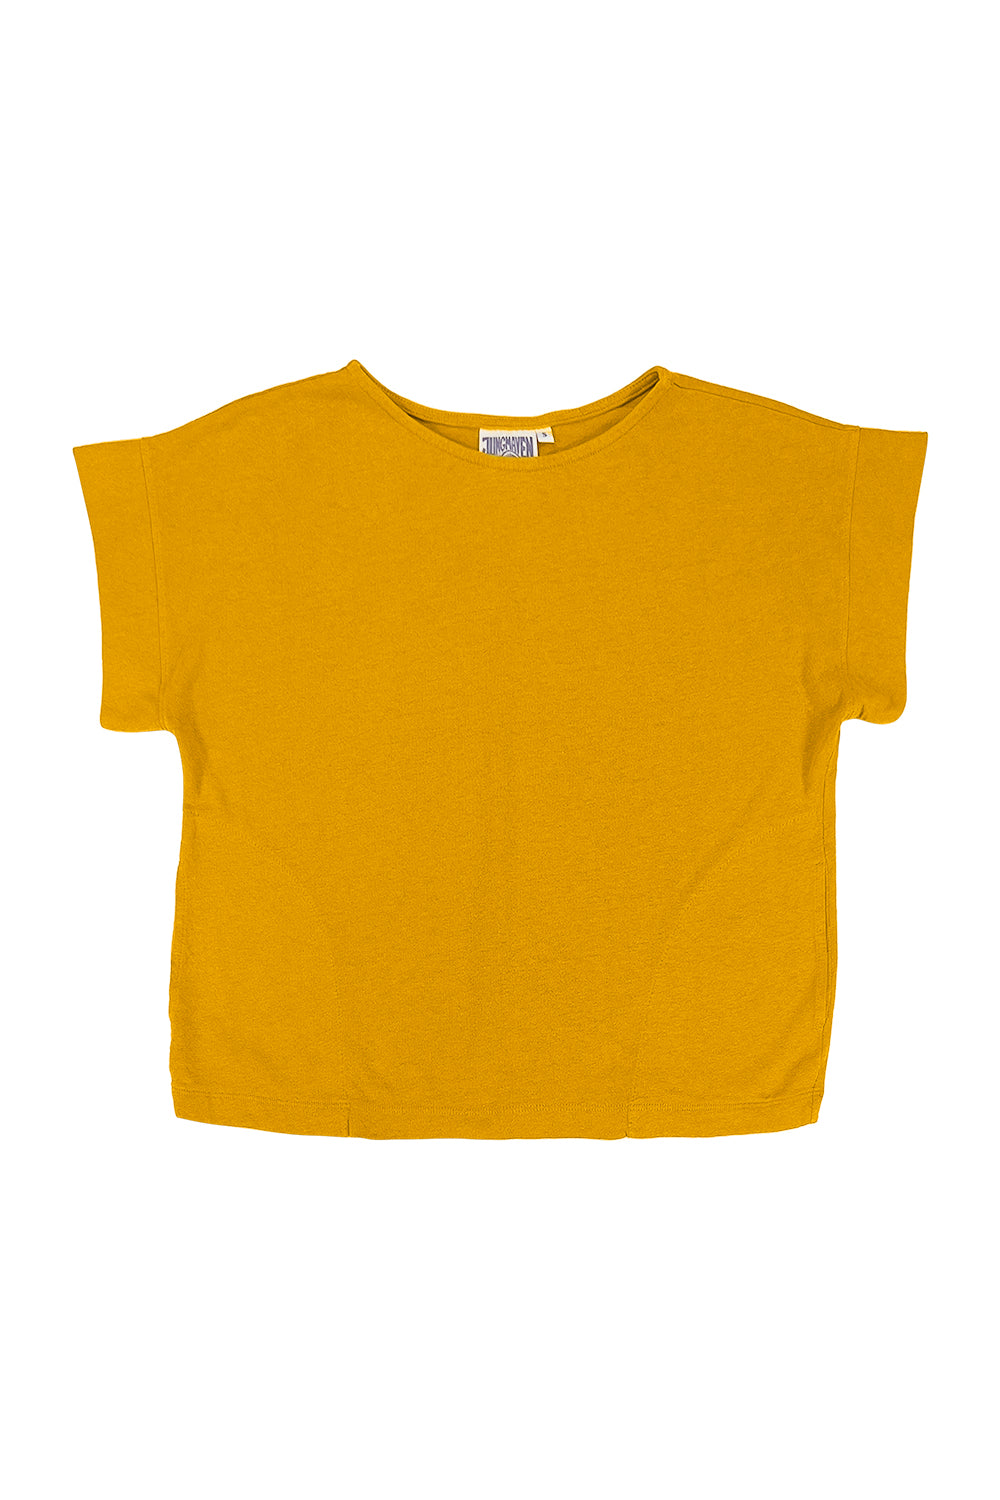 Taos Top | Jungmaven Hemp Clothing & Accessories / Color: Spicy Mustard